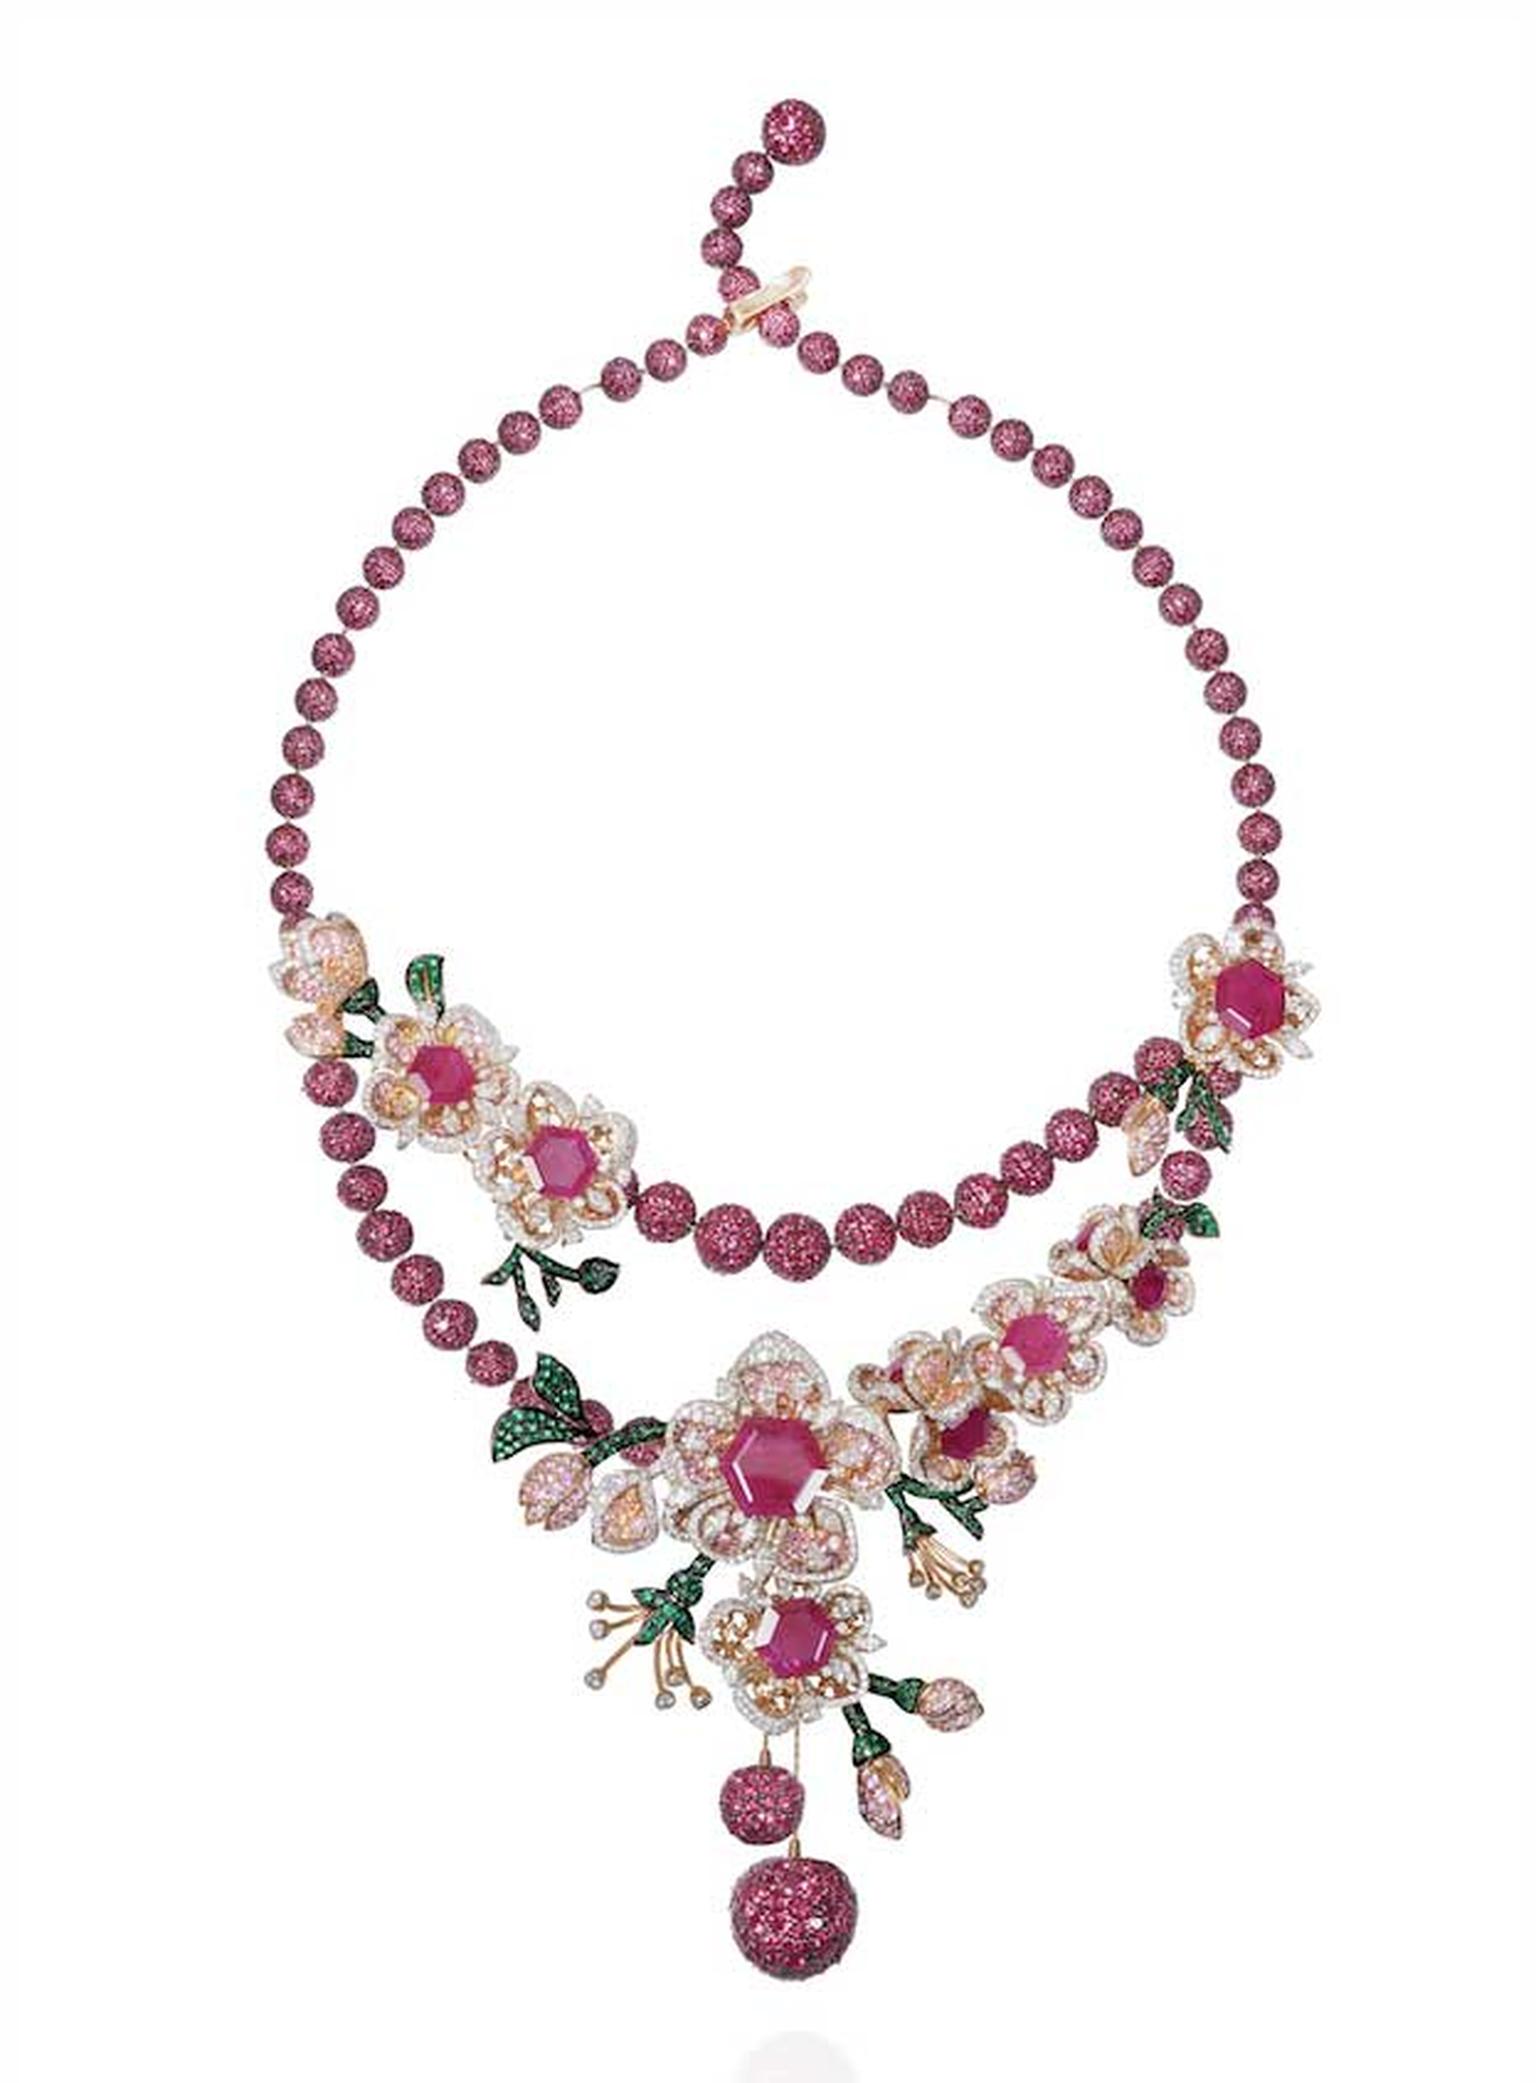 Lot 6, a Gemfields Mozambican ruby, Gemfields Zambian emerald, diamond, pink sapphire and orange sapphire necklace by Mirari, to be auctioned as part of a suite (estimate: INR 3,600,000 - 4,350,000; $60,000 - 73,000)